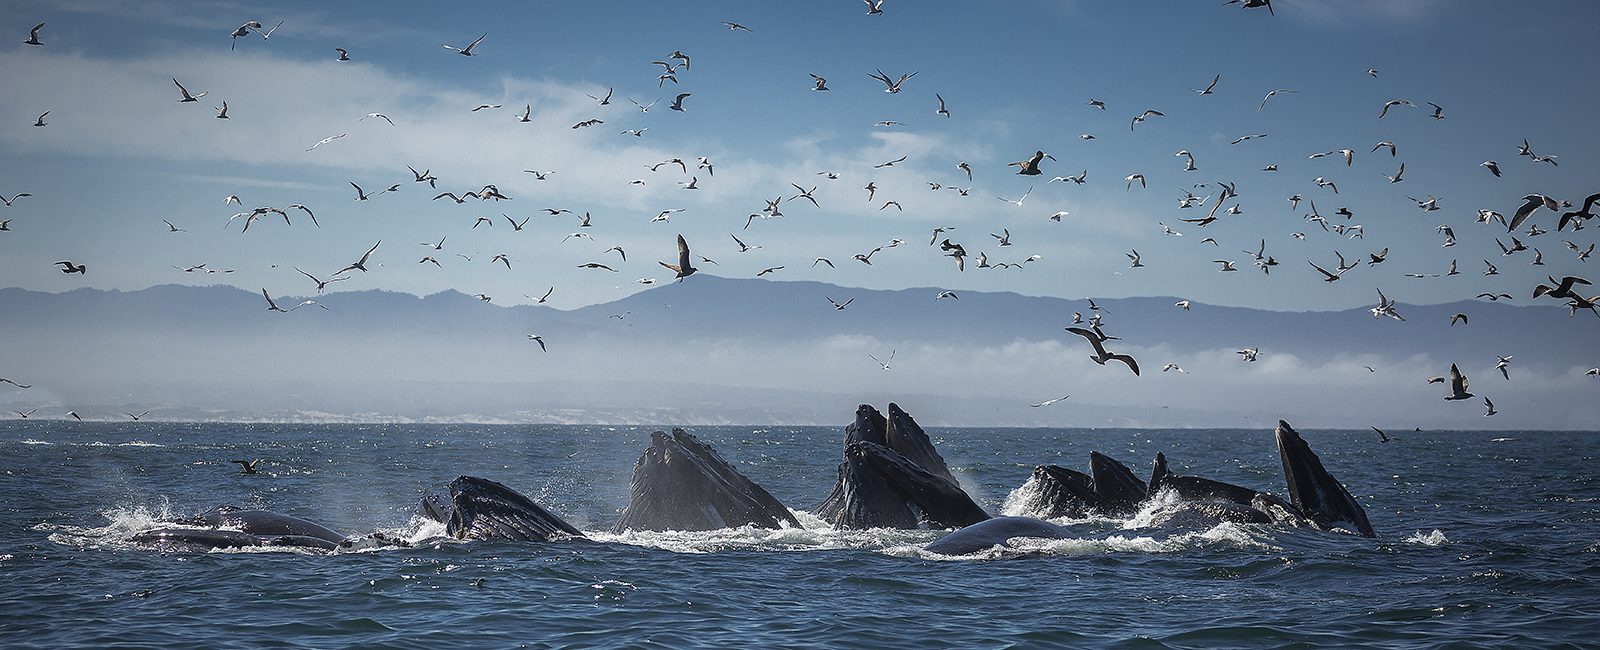 The Best Places for Whale Watching in Northern California Select Registry